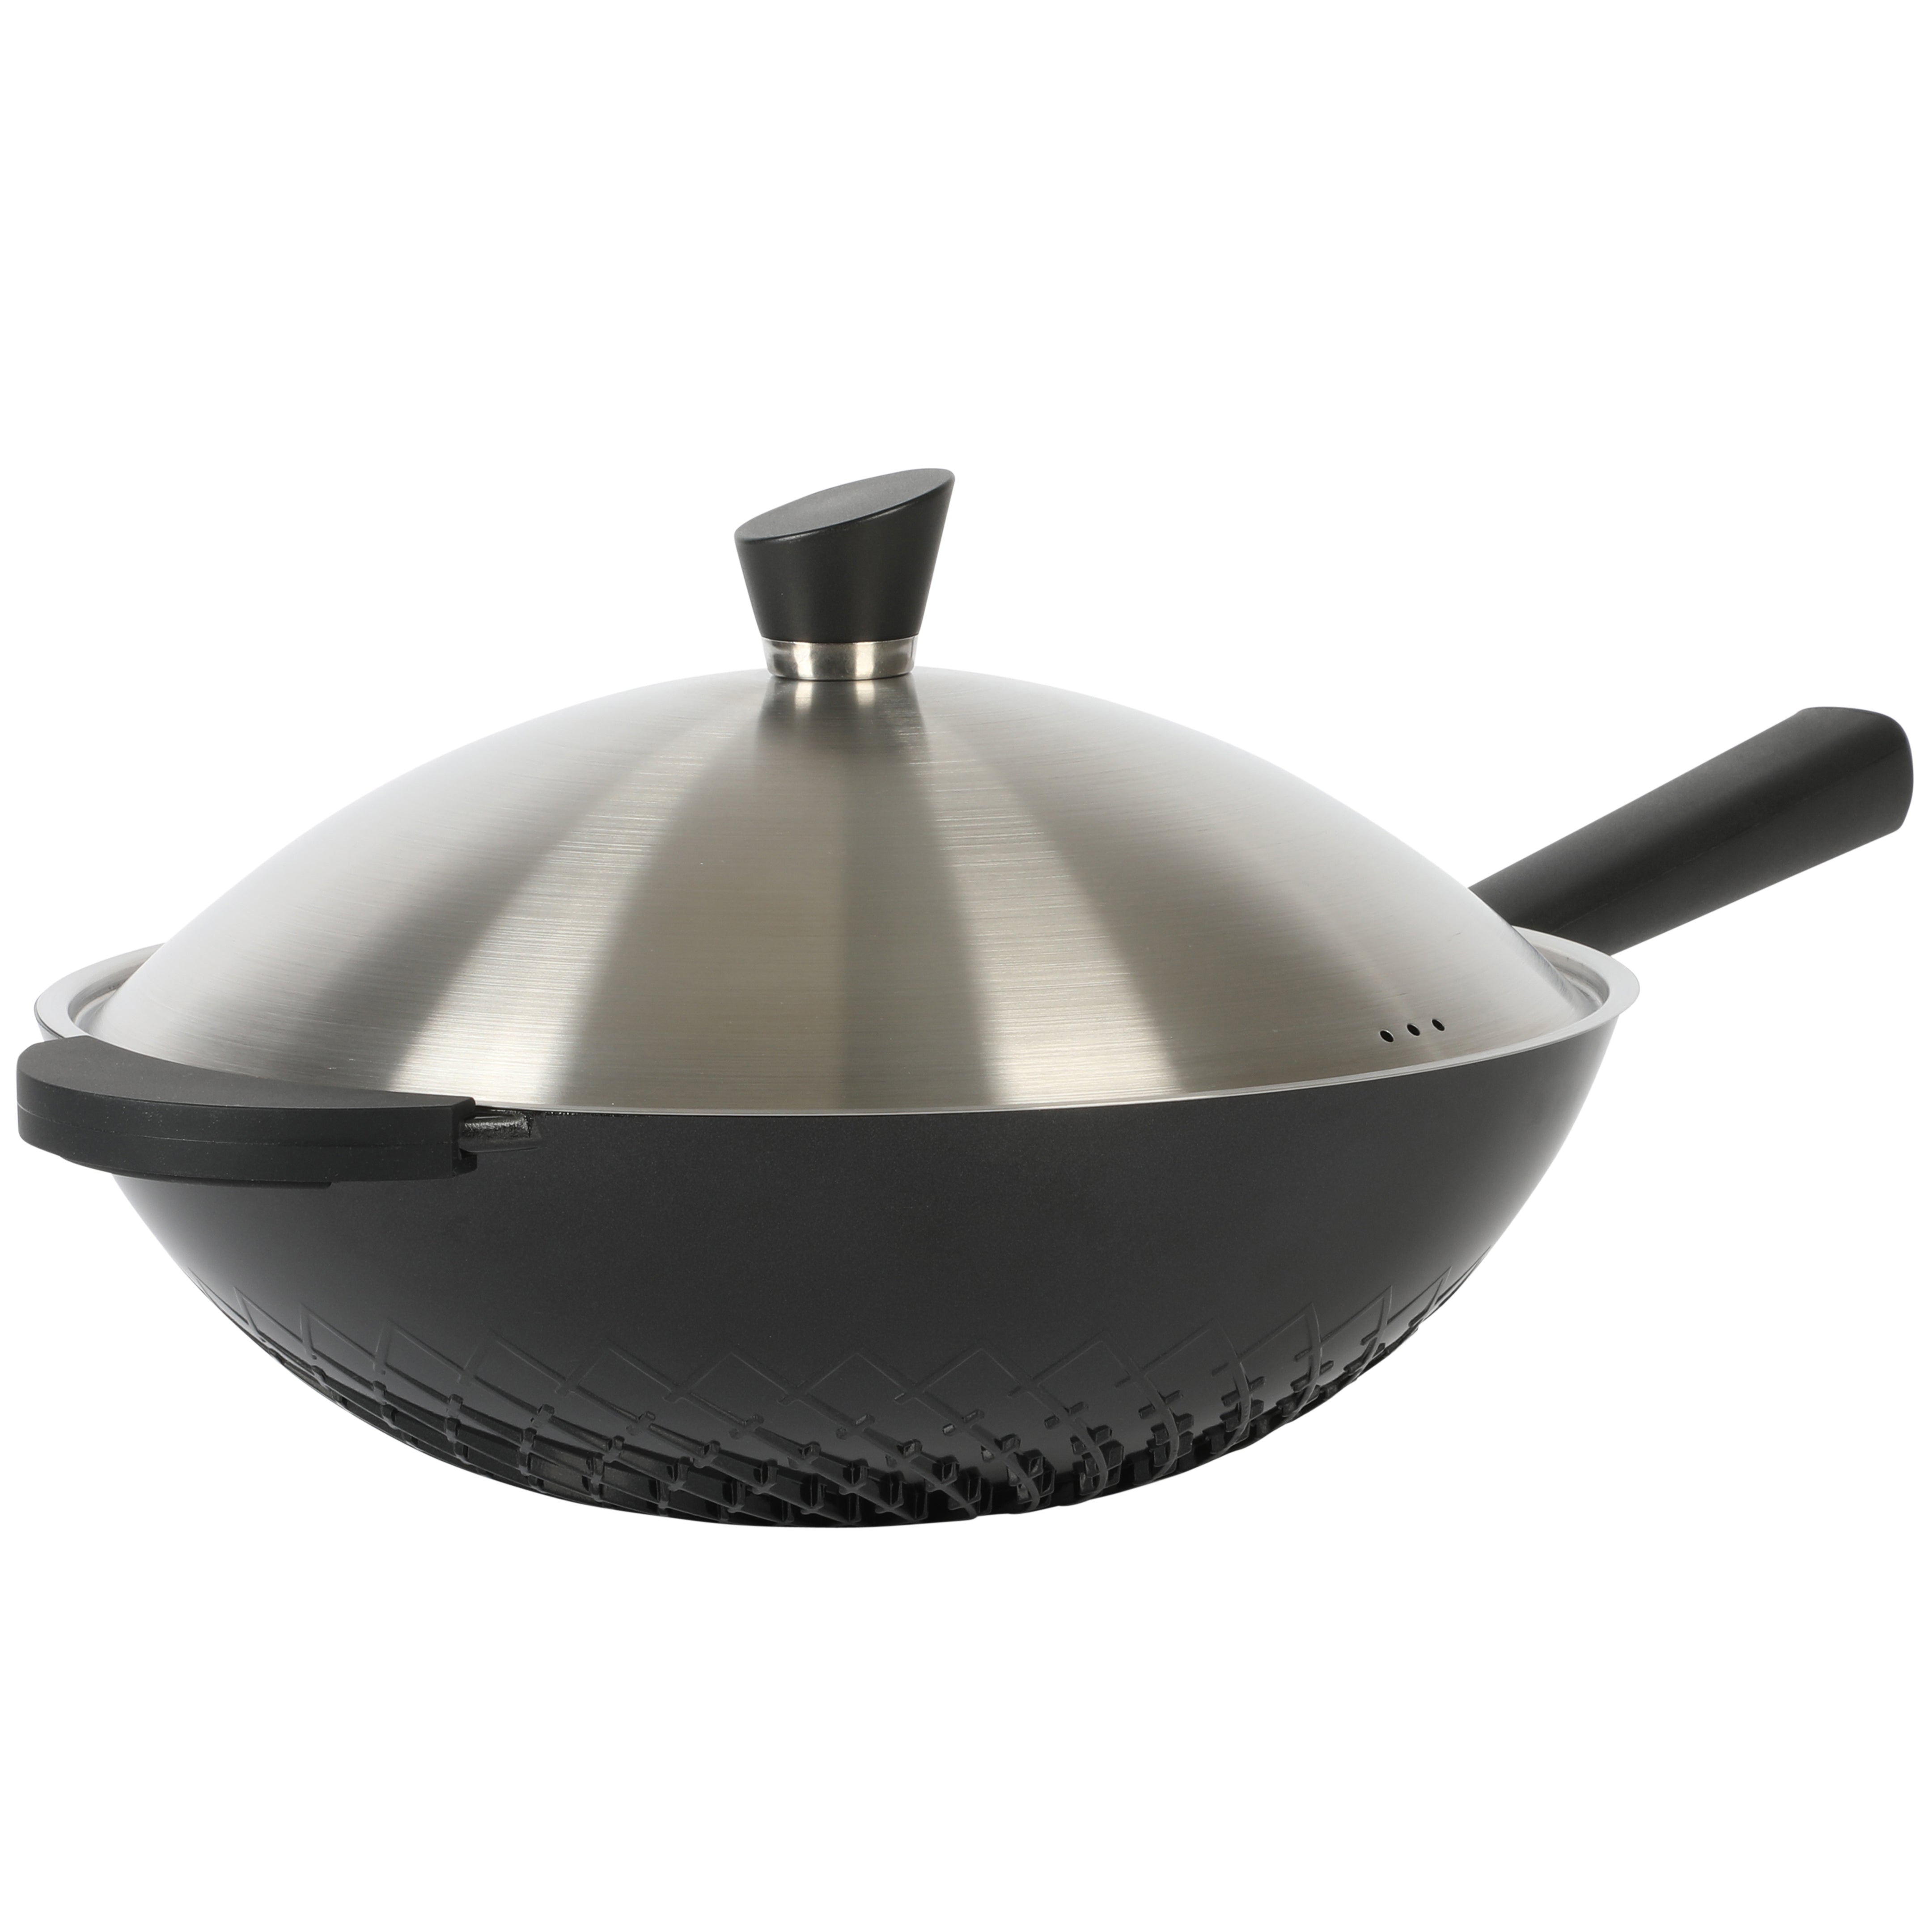 Stainless Steel 12.5 Wok with Lid and Steamer